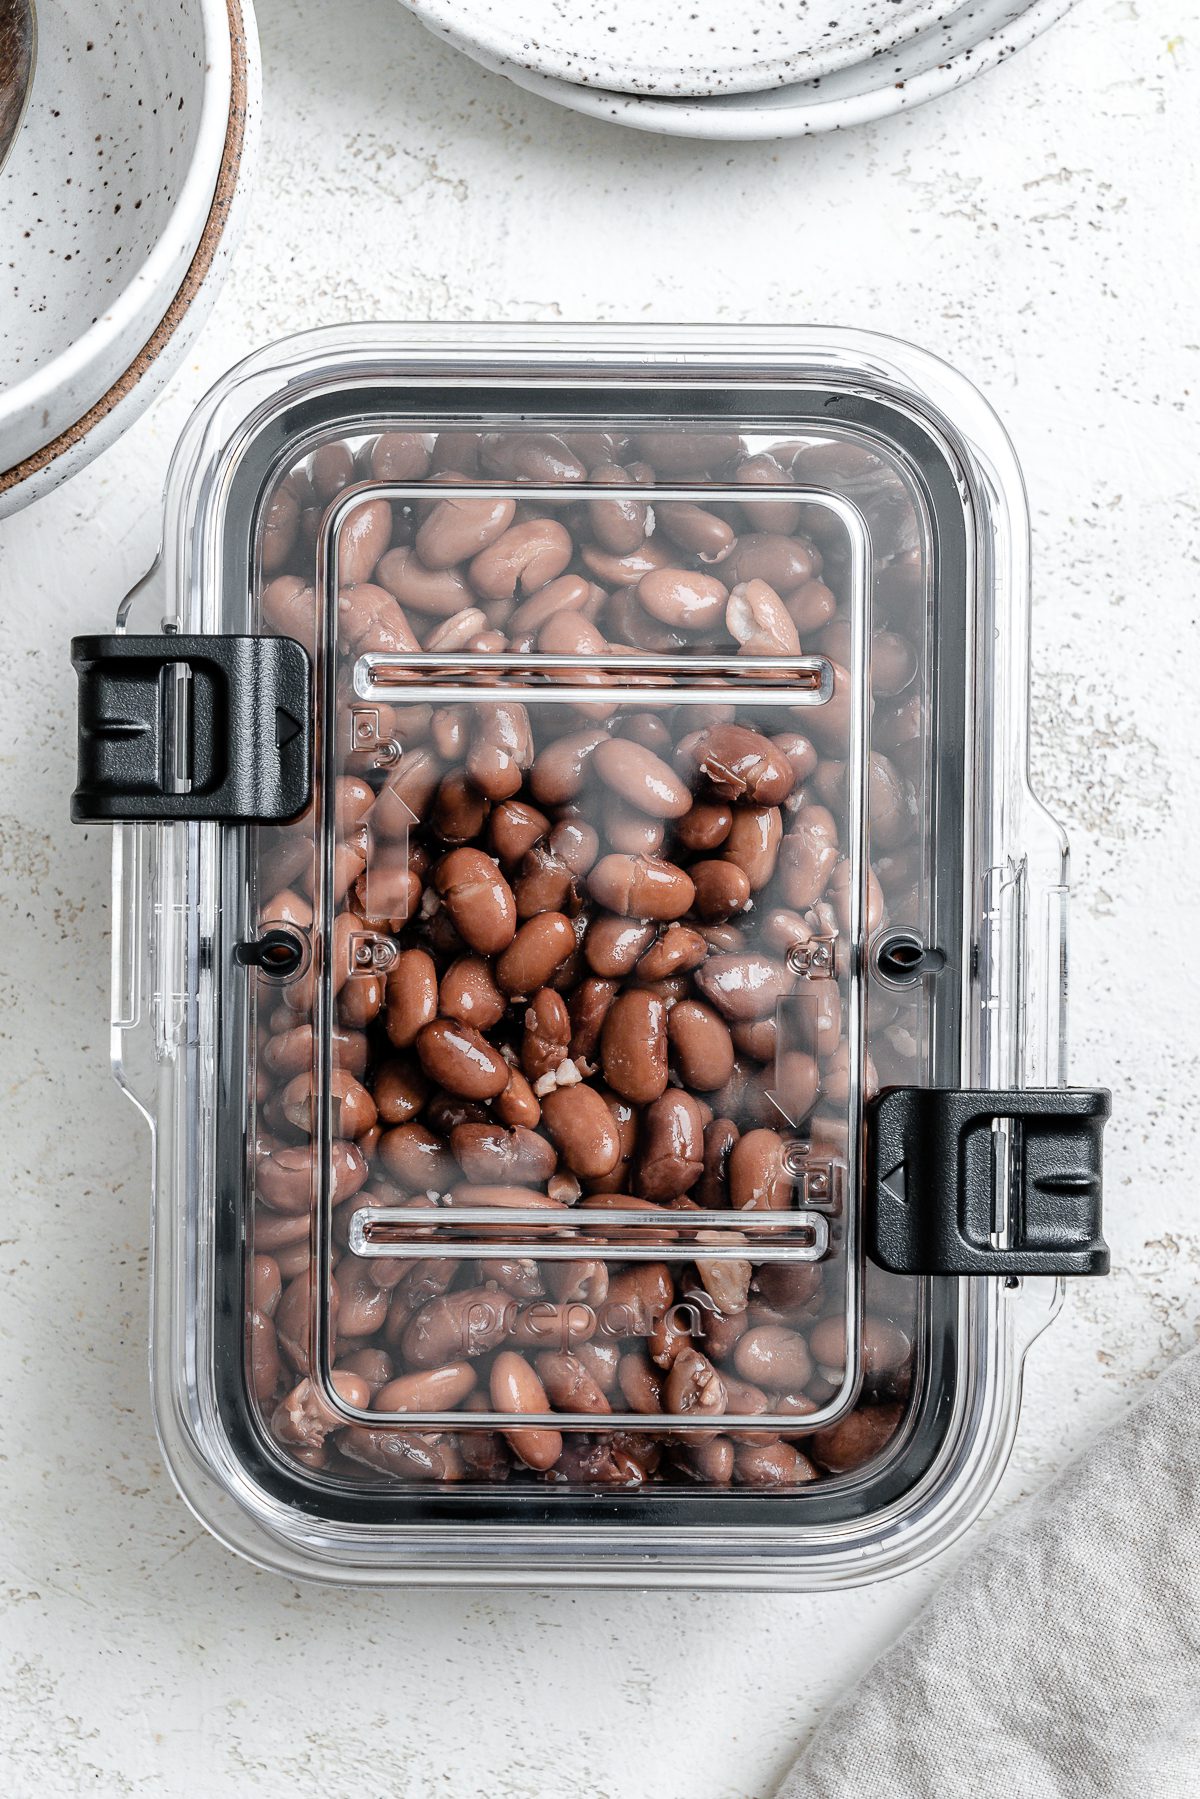 completed beans in a container against a white background